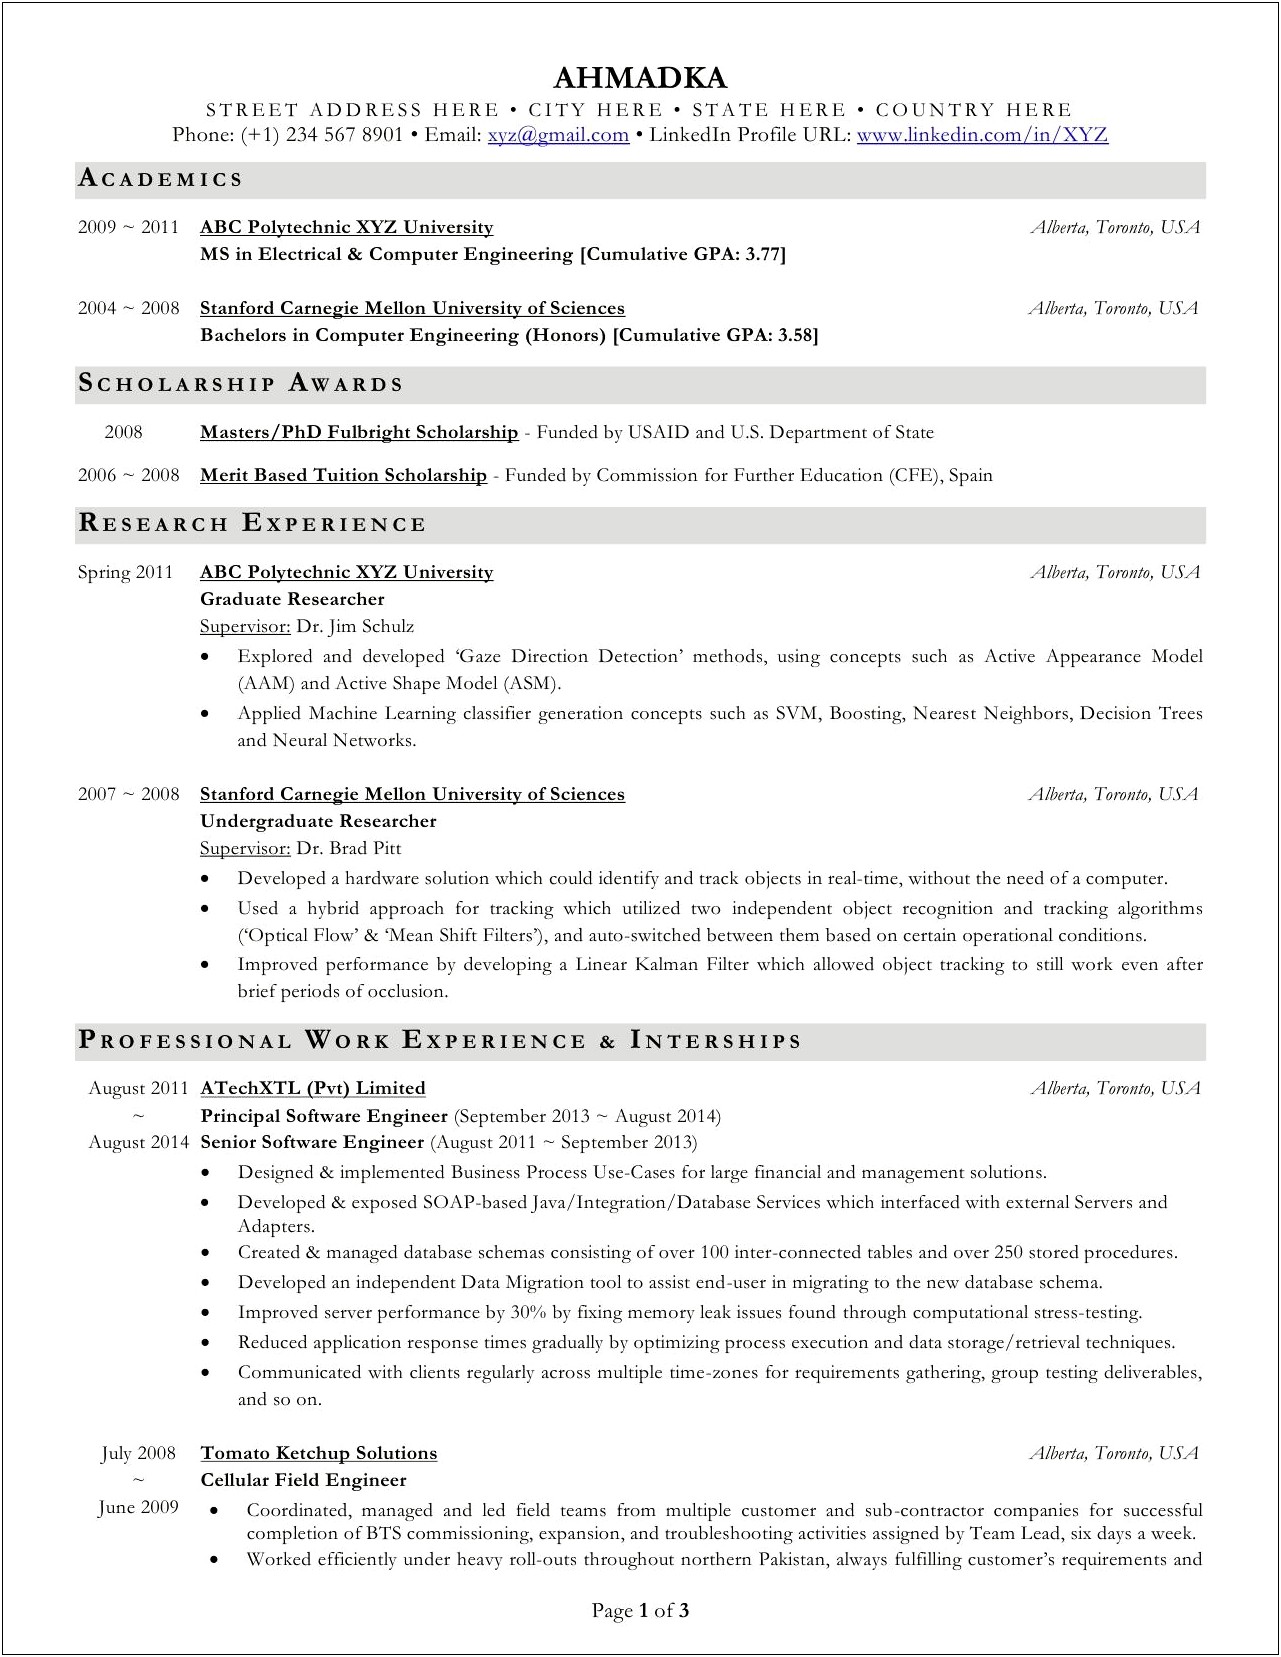 Resume And Cv For Applying To Graduate School